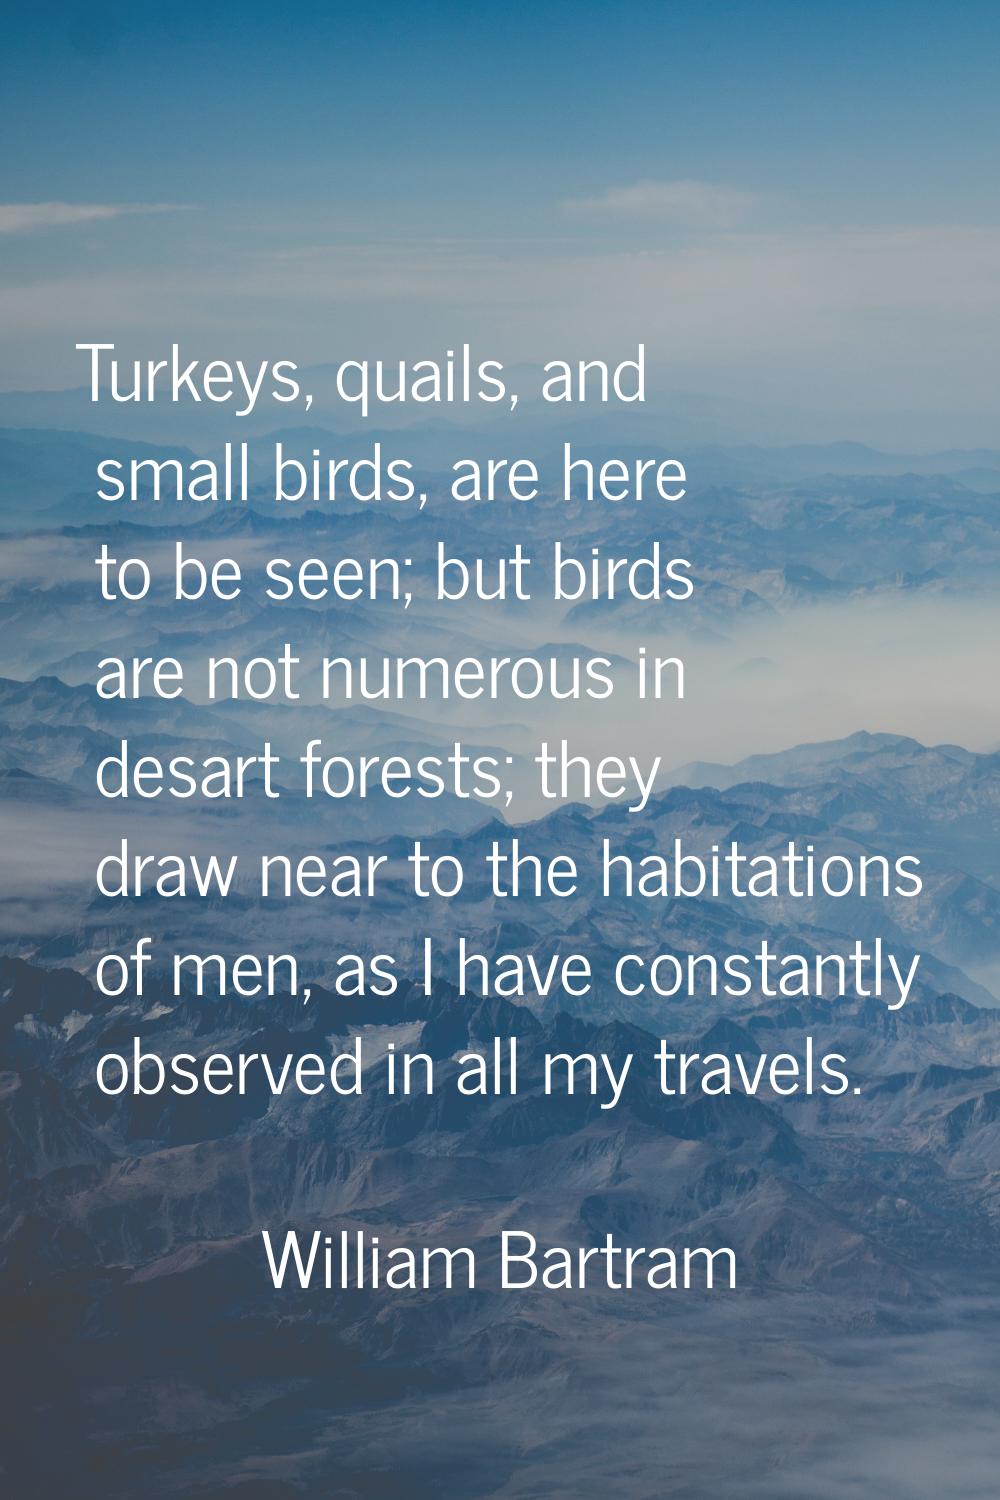 Turkeys, quails, and small birds, are here to be seen; but birds are not numerous in desart forests